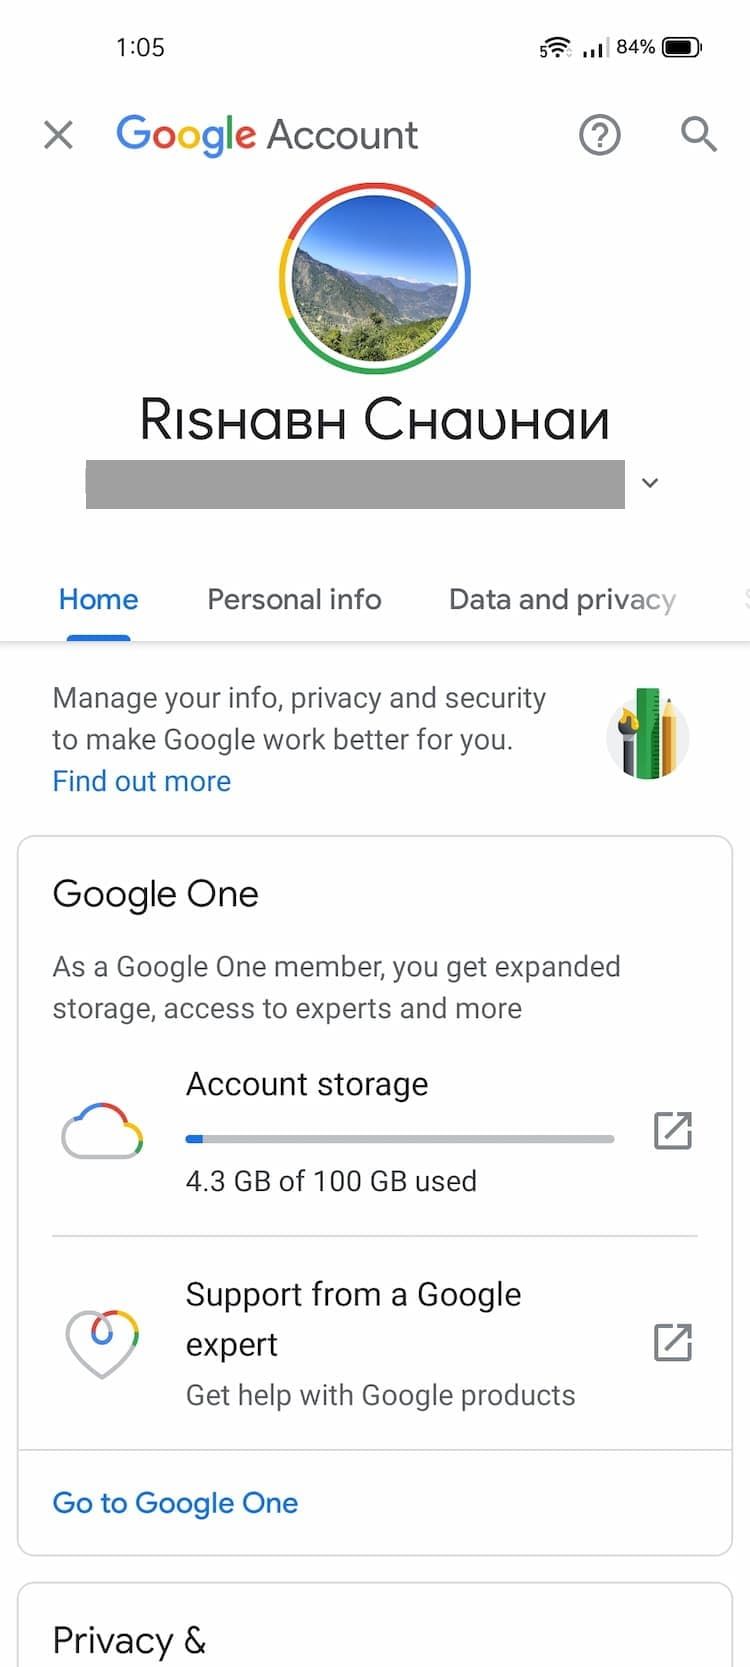 Google Account Settings Overview